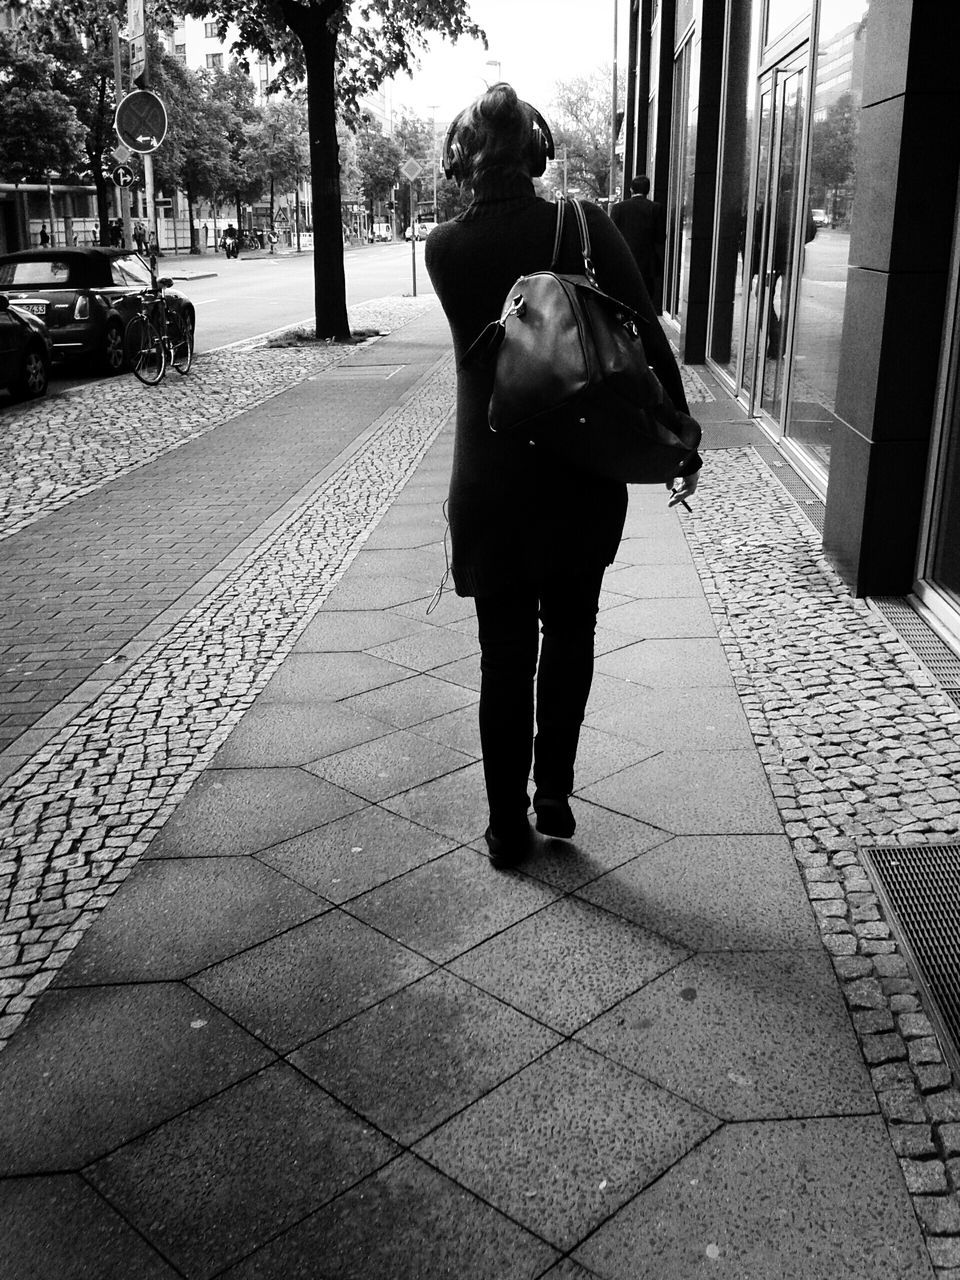 full length, lifestyles, street, walking, shadow, rear view, leisure activity, sunlight, sidewalk, footpath, casual clothing, city, person, city life, tree, cobblestone, road, day